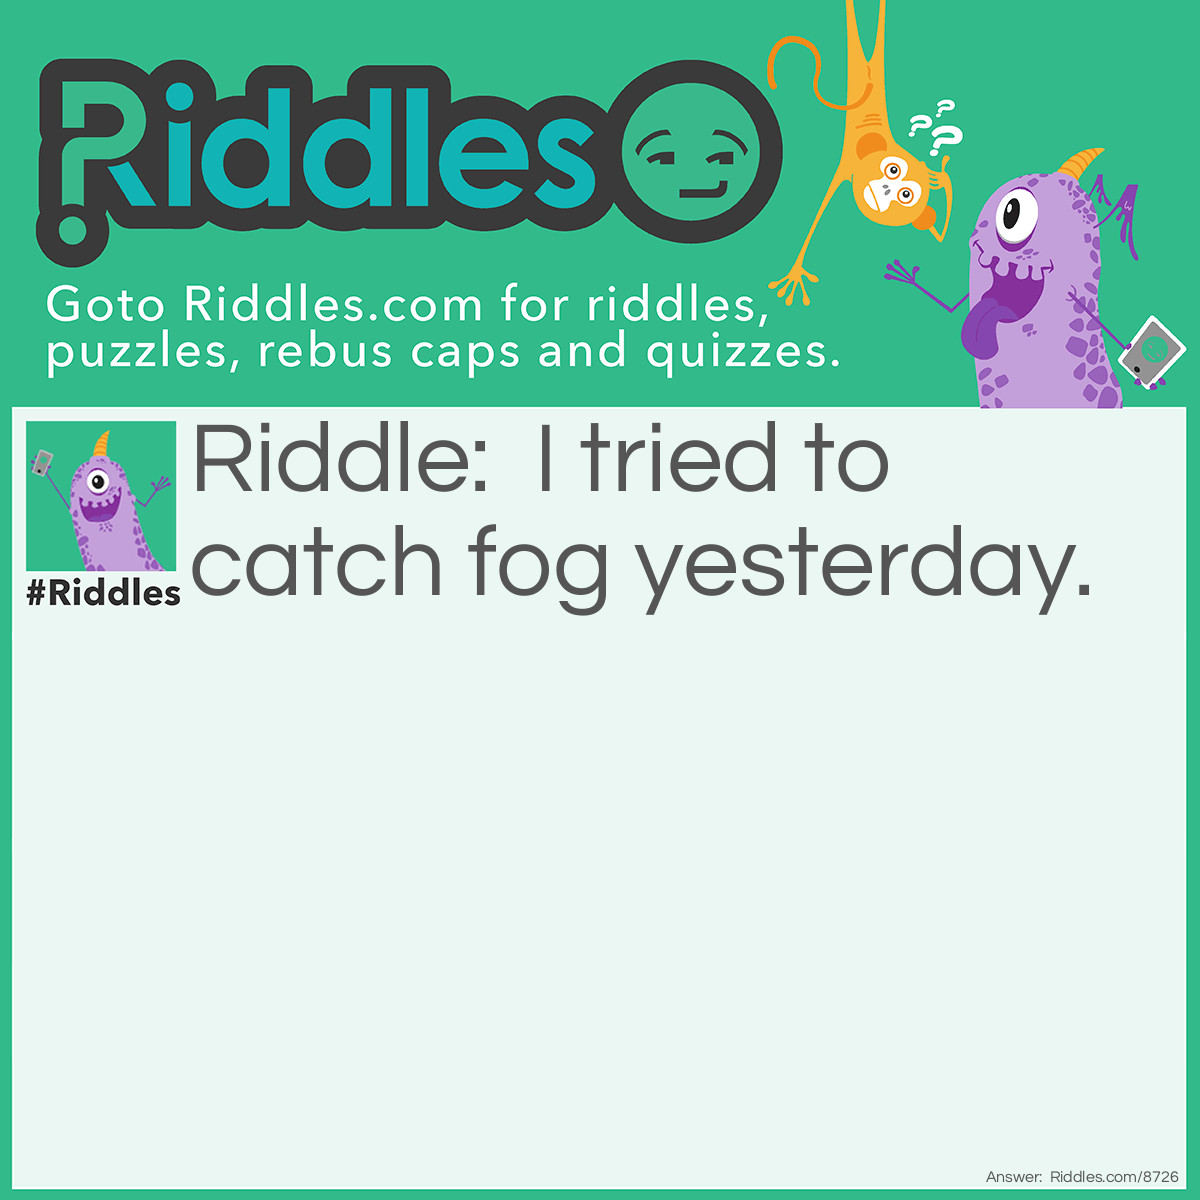 Riddle: I tried to catch fog yesterday. Answer: Mist.